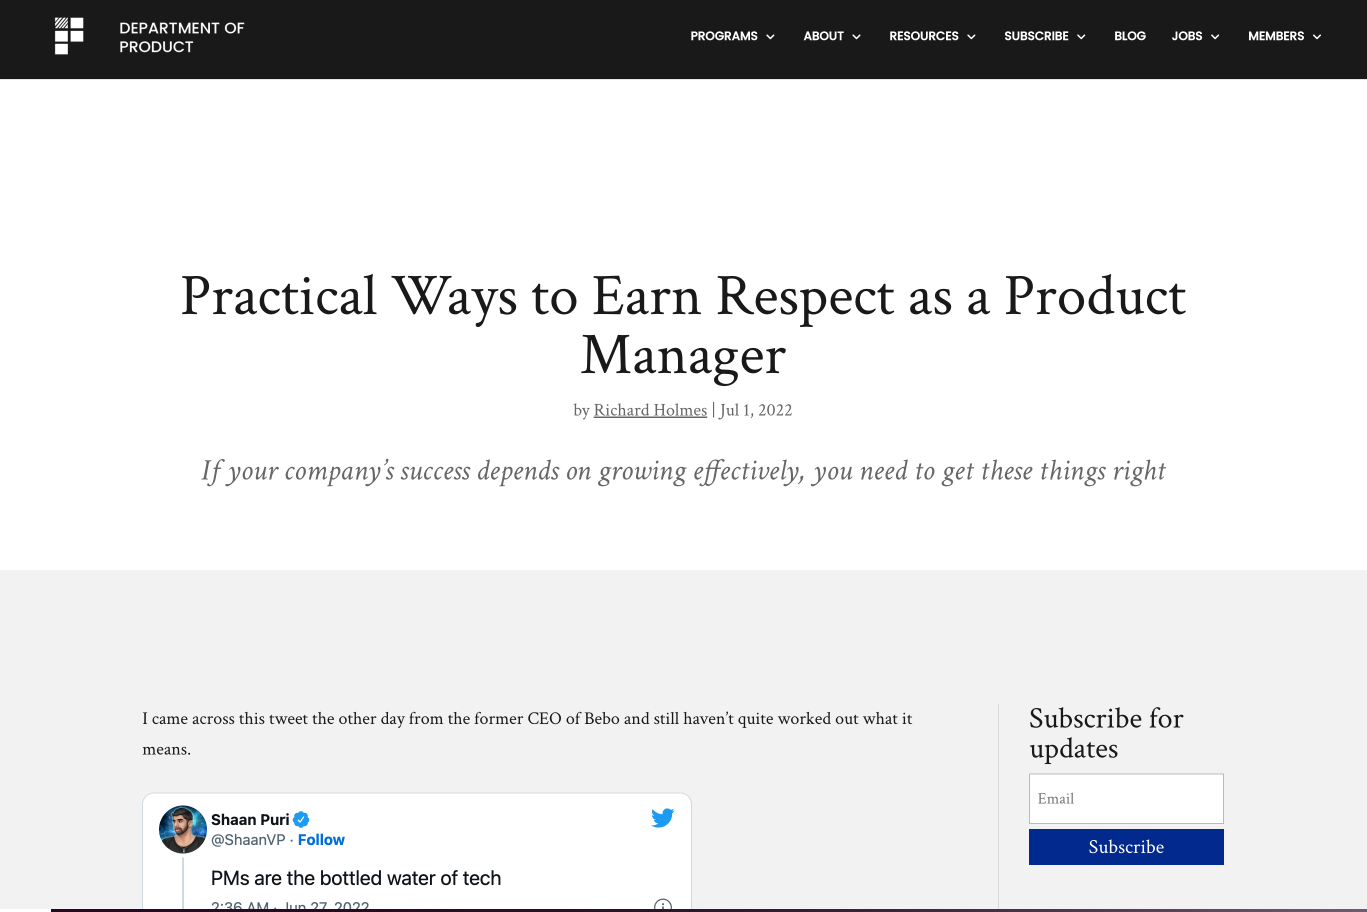 Practical Ways to Earn Respect as a Product Manager - Department of Product